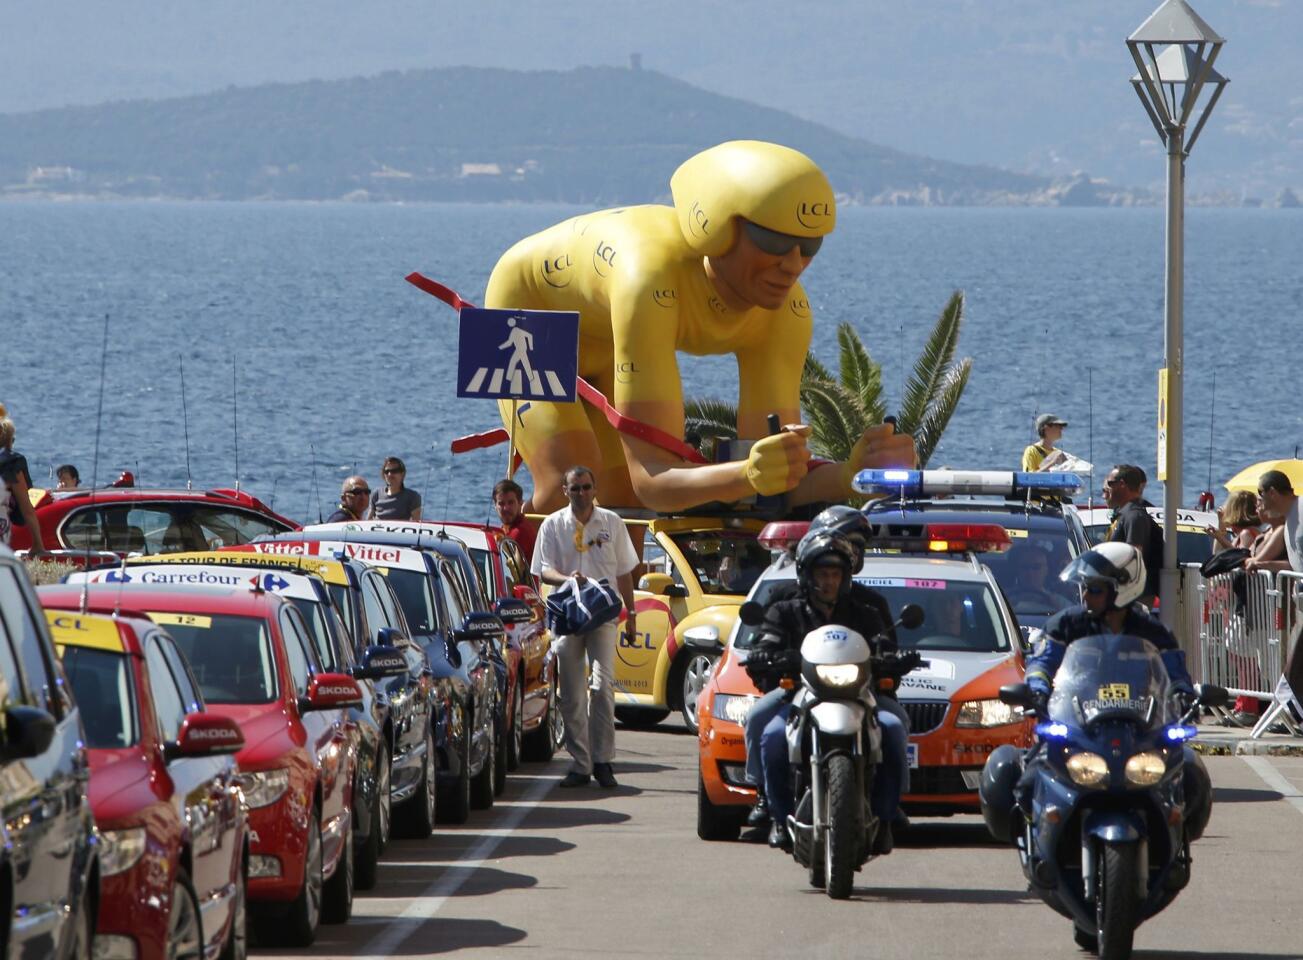 Publicity vehicles from the Tour de France caravan make their way during the 145,5 km third stage of the centenary Tour de France cycling race from Ajaccio to Calvi